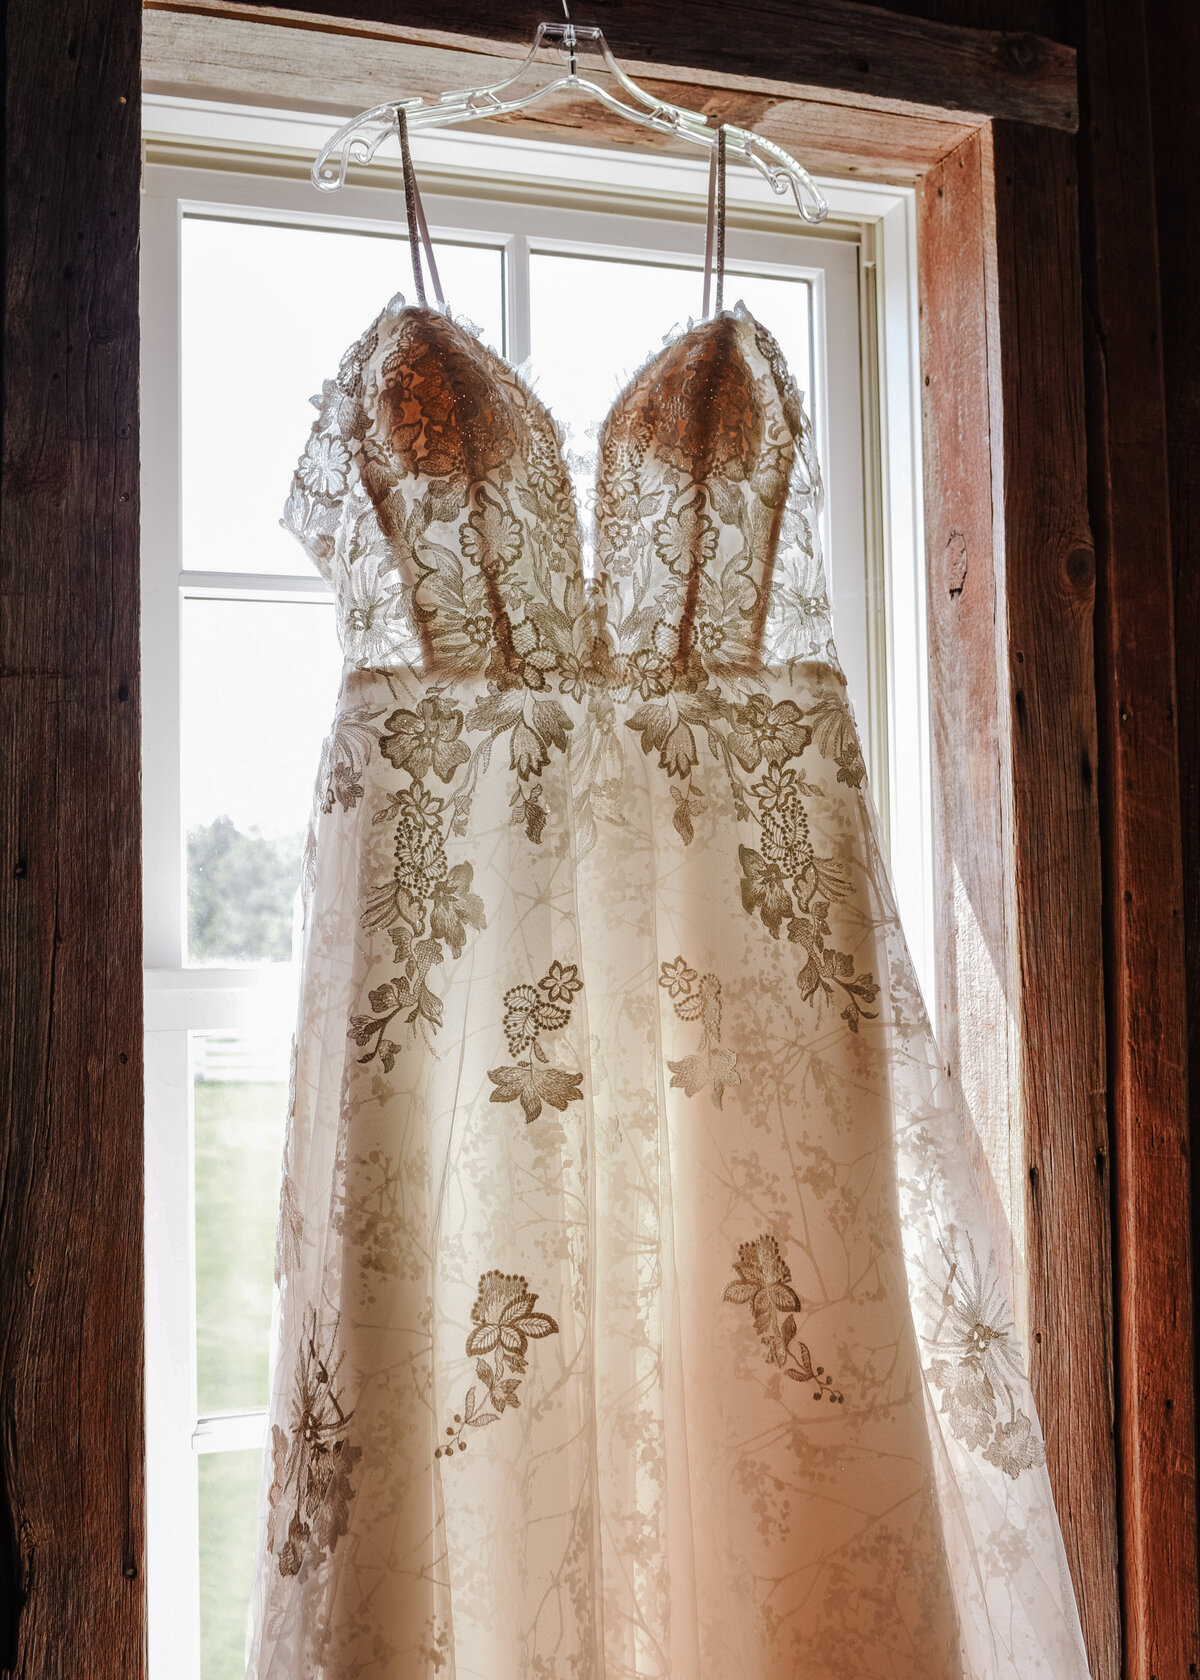 An elegant wedding dress adorned with lace details hangs in front of a window, bathed in soft natural light, awaiting the special moment it's worn by jen Jarmuzek photography a Minneapolis wedding photographer